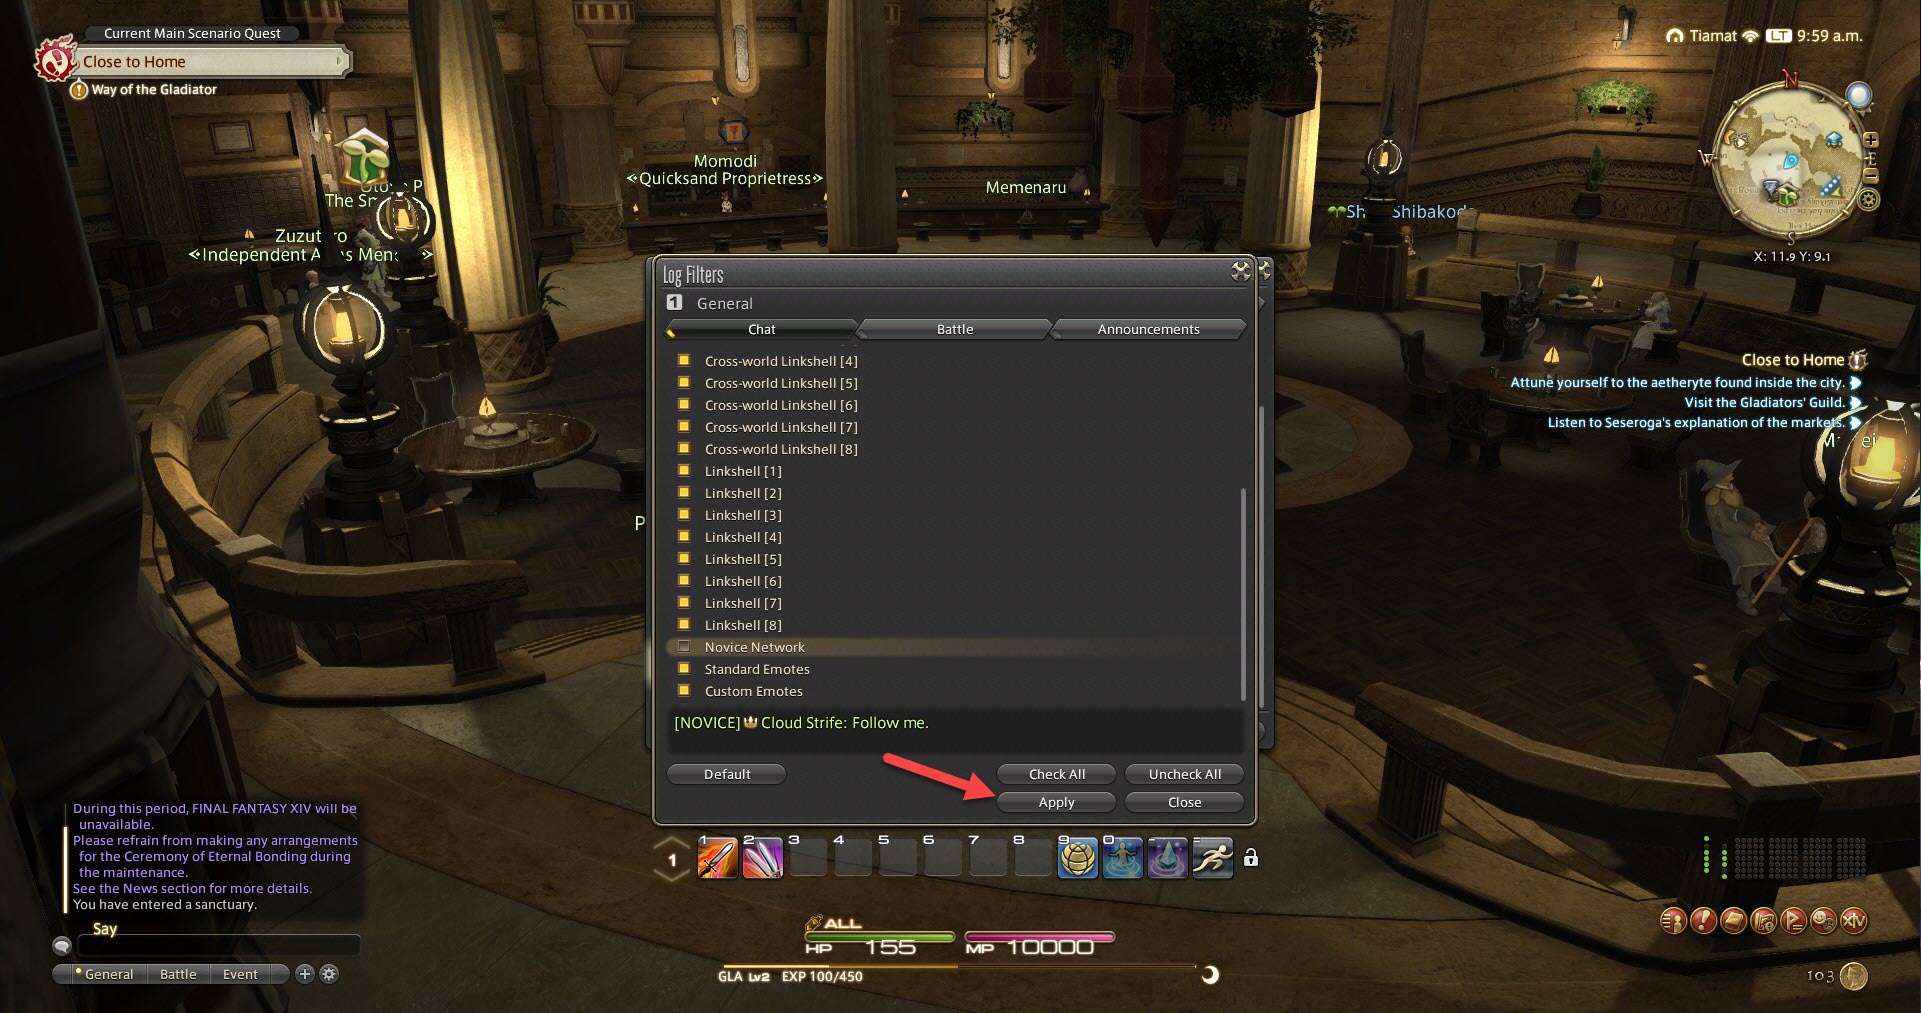 How to Leave the Novice Network in Final Fantasy XIV 3